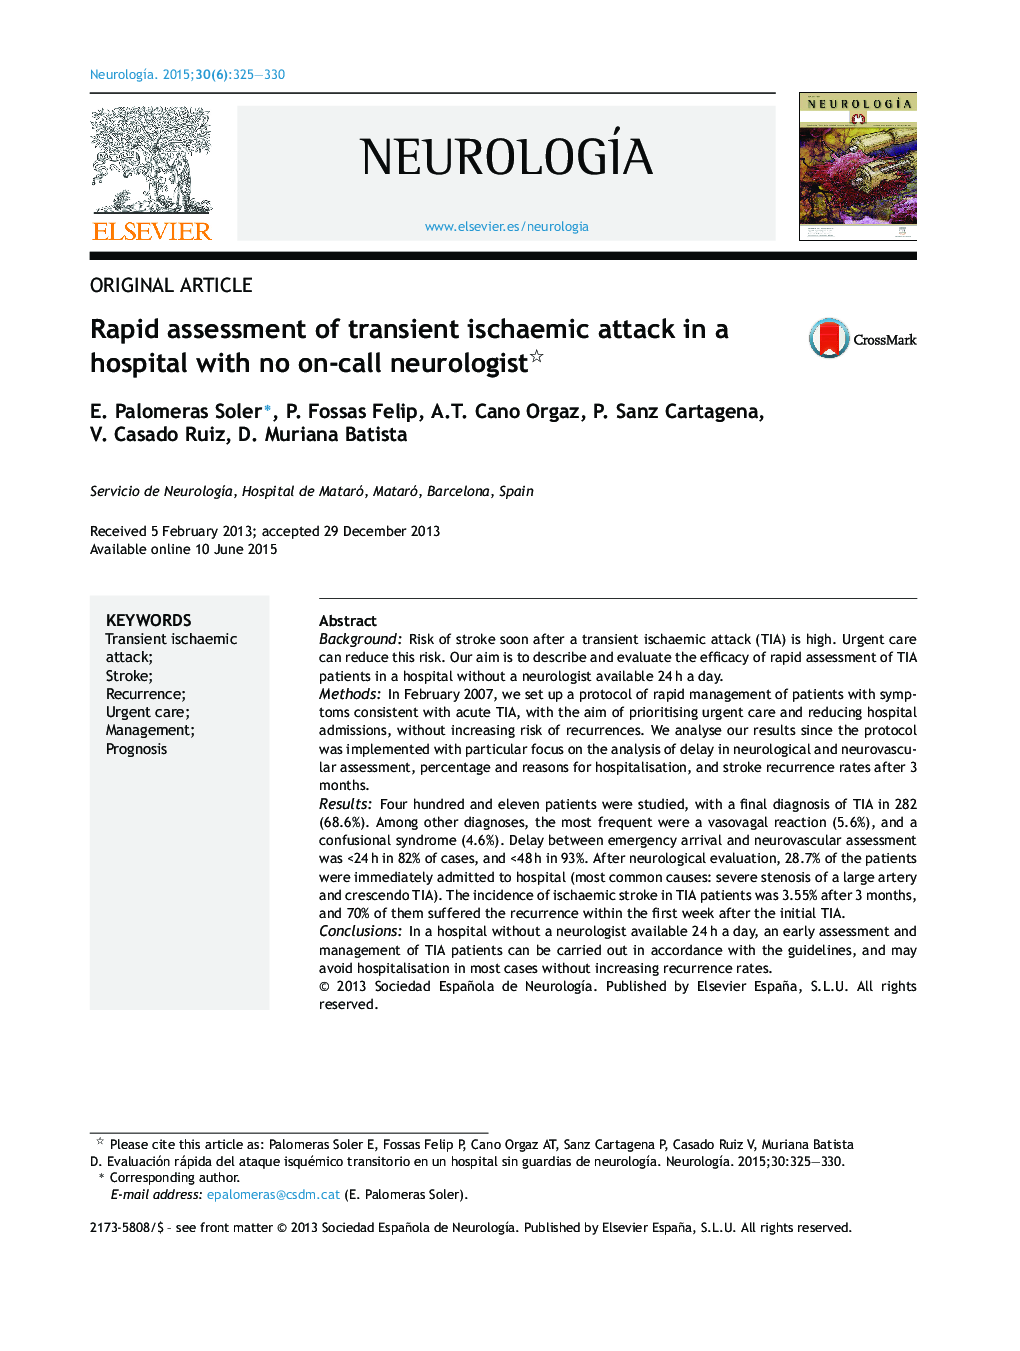 Rapid assessment of transient ischaemic attack in a hospital with no on-call neurologist 